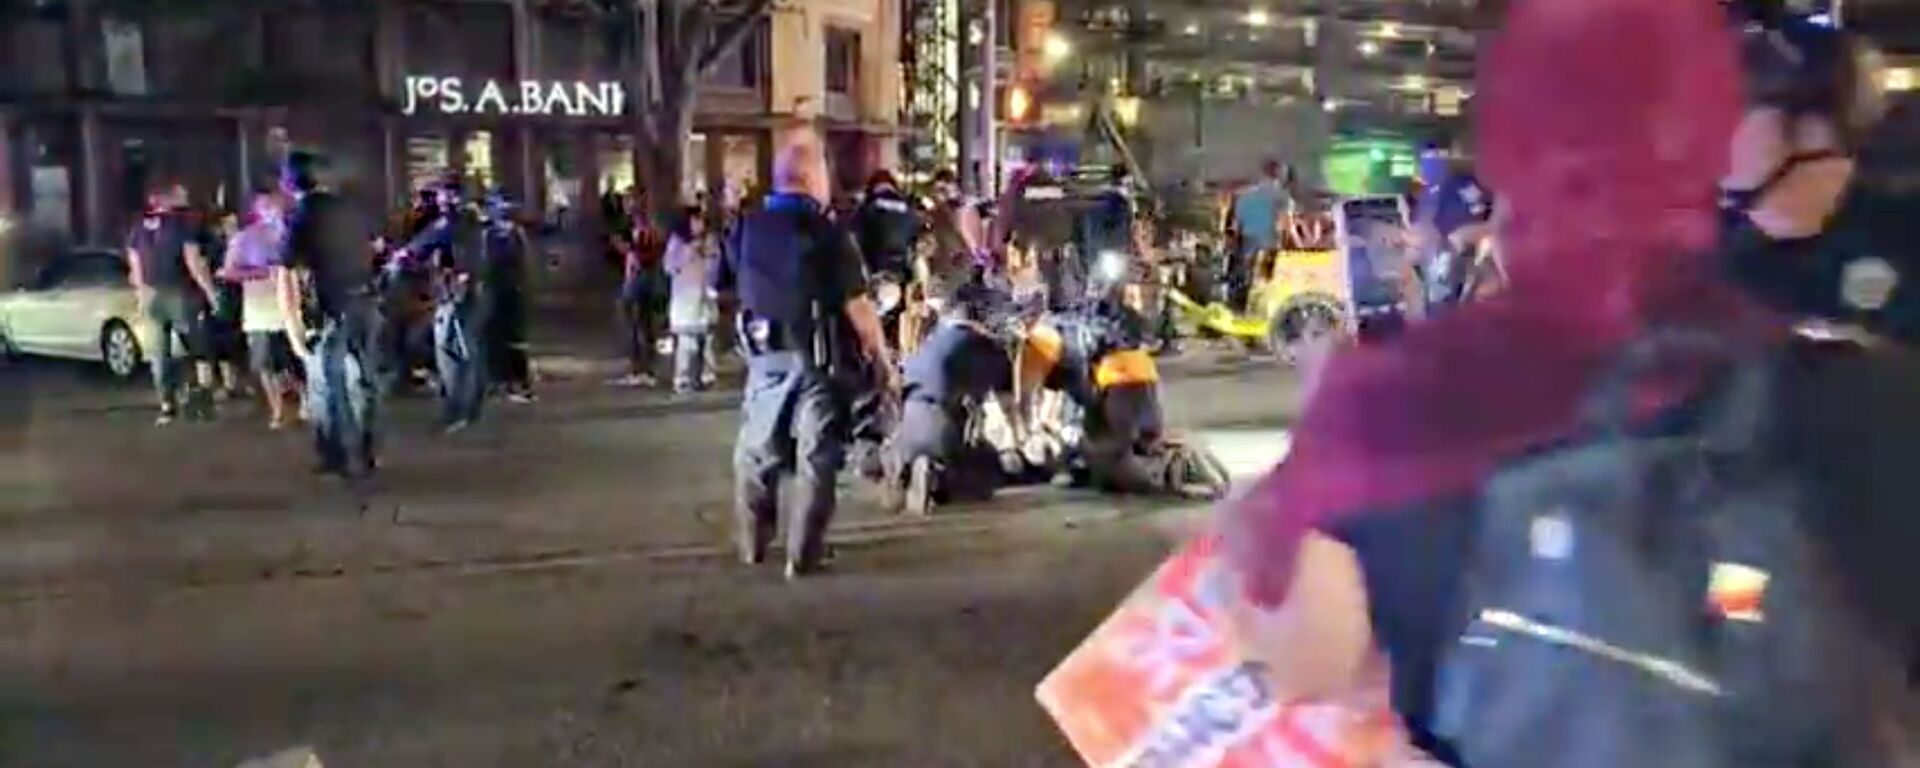 Police and protesters gather around a demonstrator who got shot after several shots were fired during a Black Lives Matter protest in downtown Austin, Texas, U.S., July 25, 2020 in this screen grab obtained from a social media video. - Sputnik International, 1920, 27.07.2020